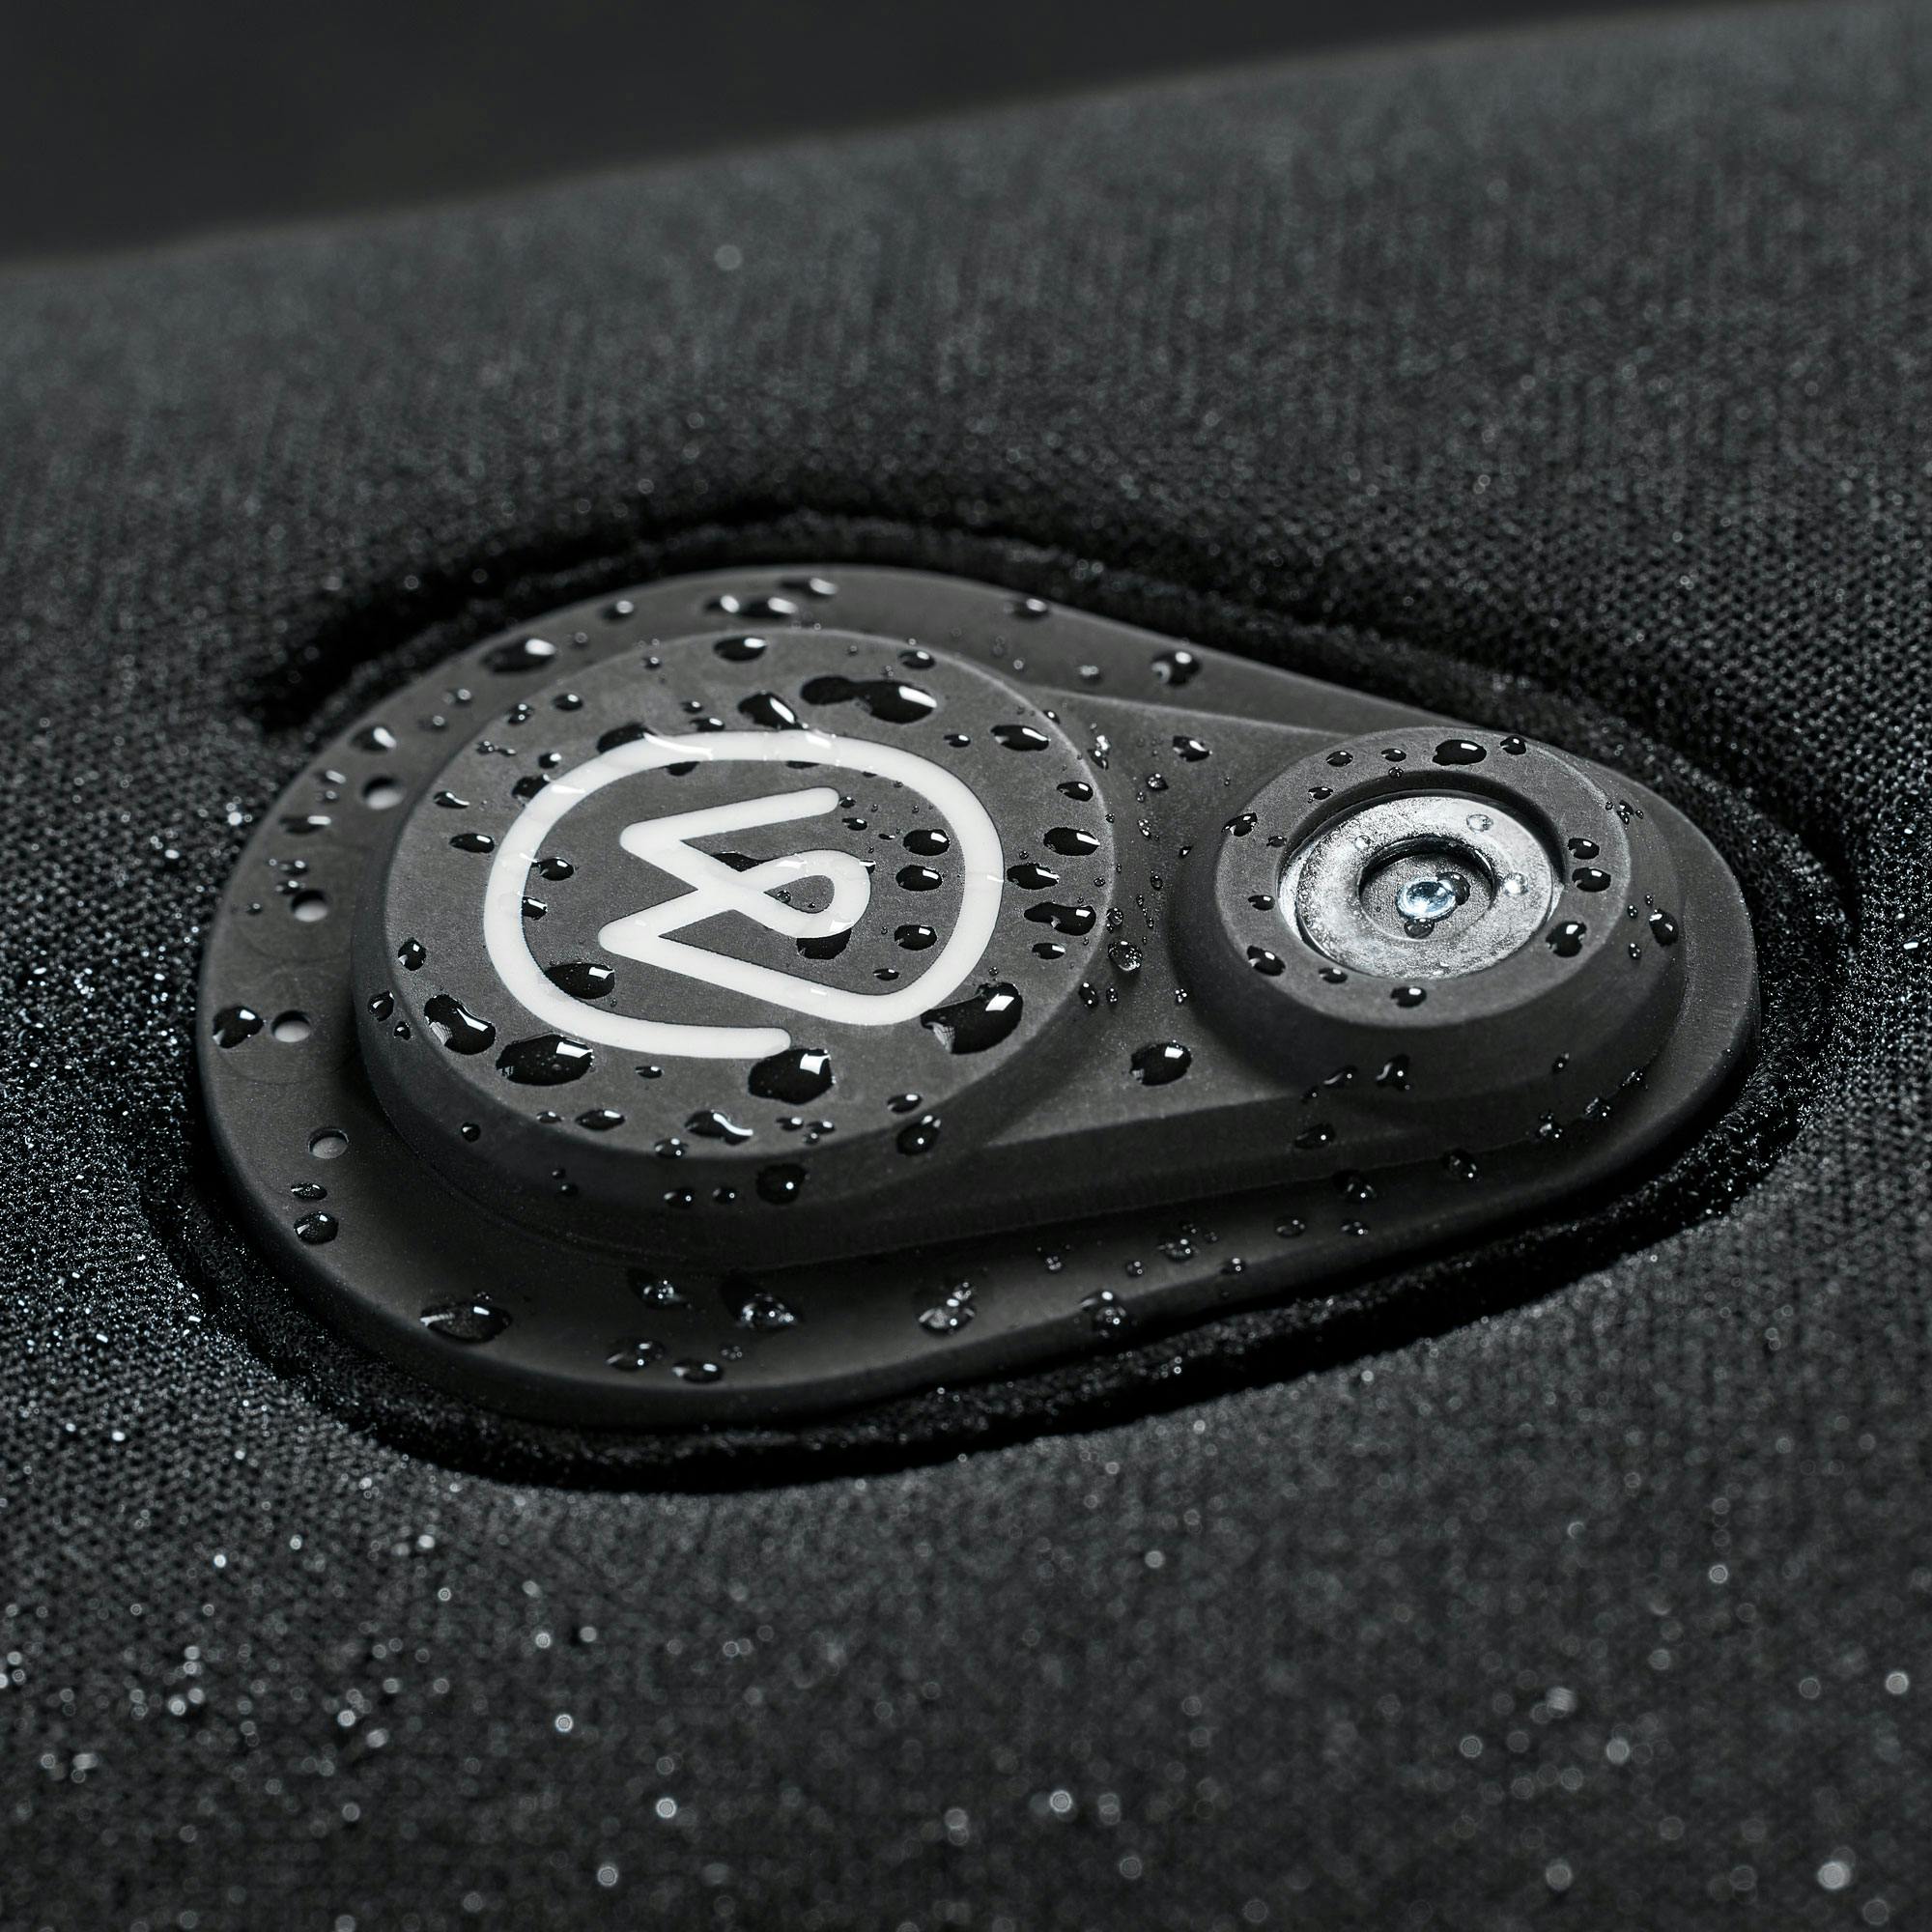 Photo showing water on the button